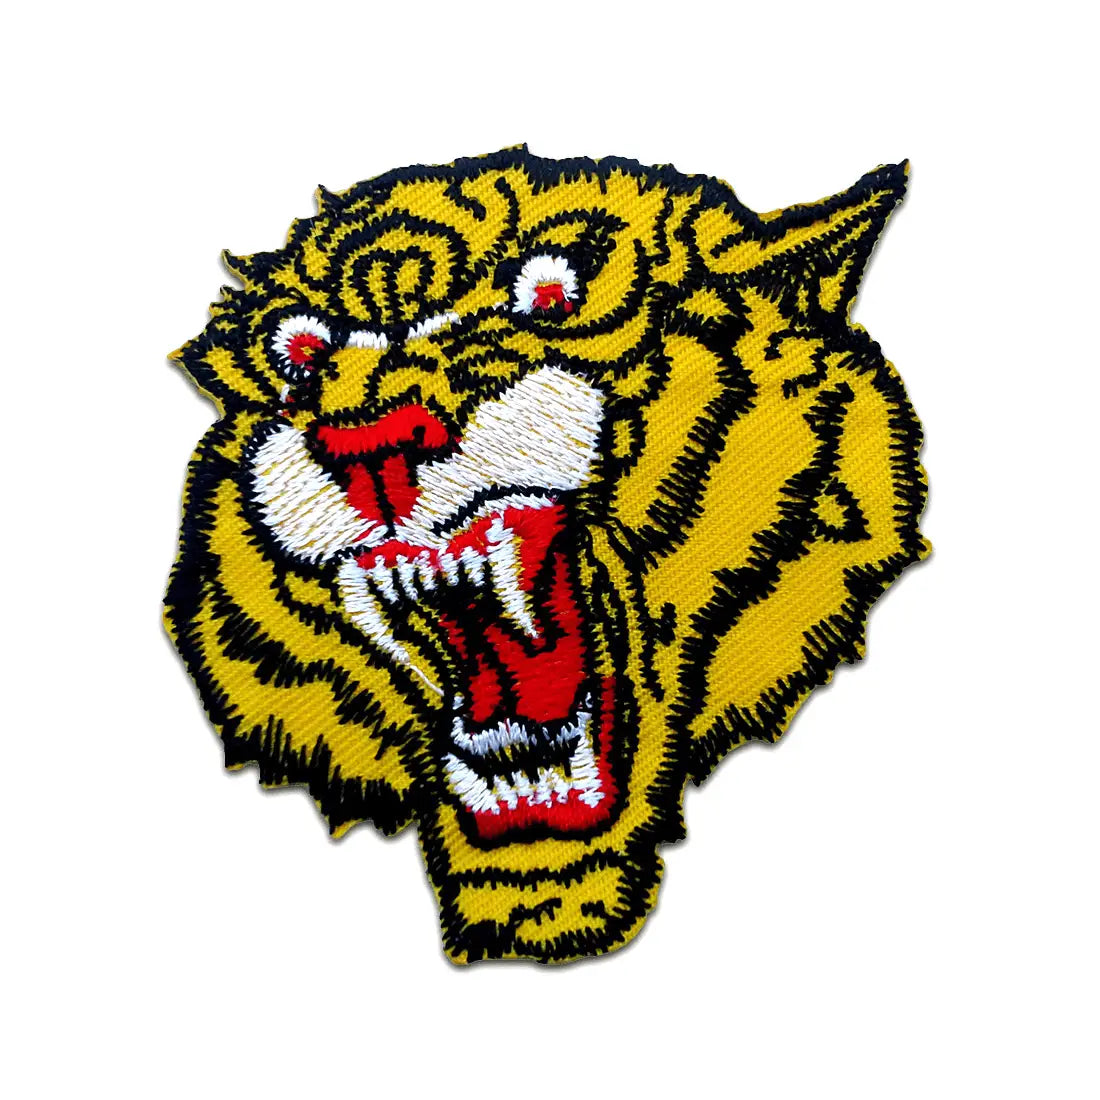 An embroidered patch of a yellow tiger growling with an open mouth